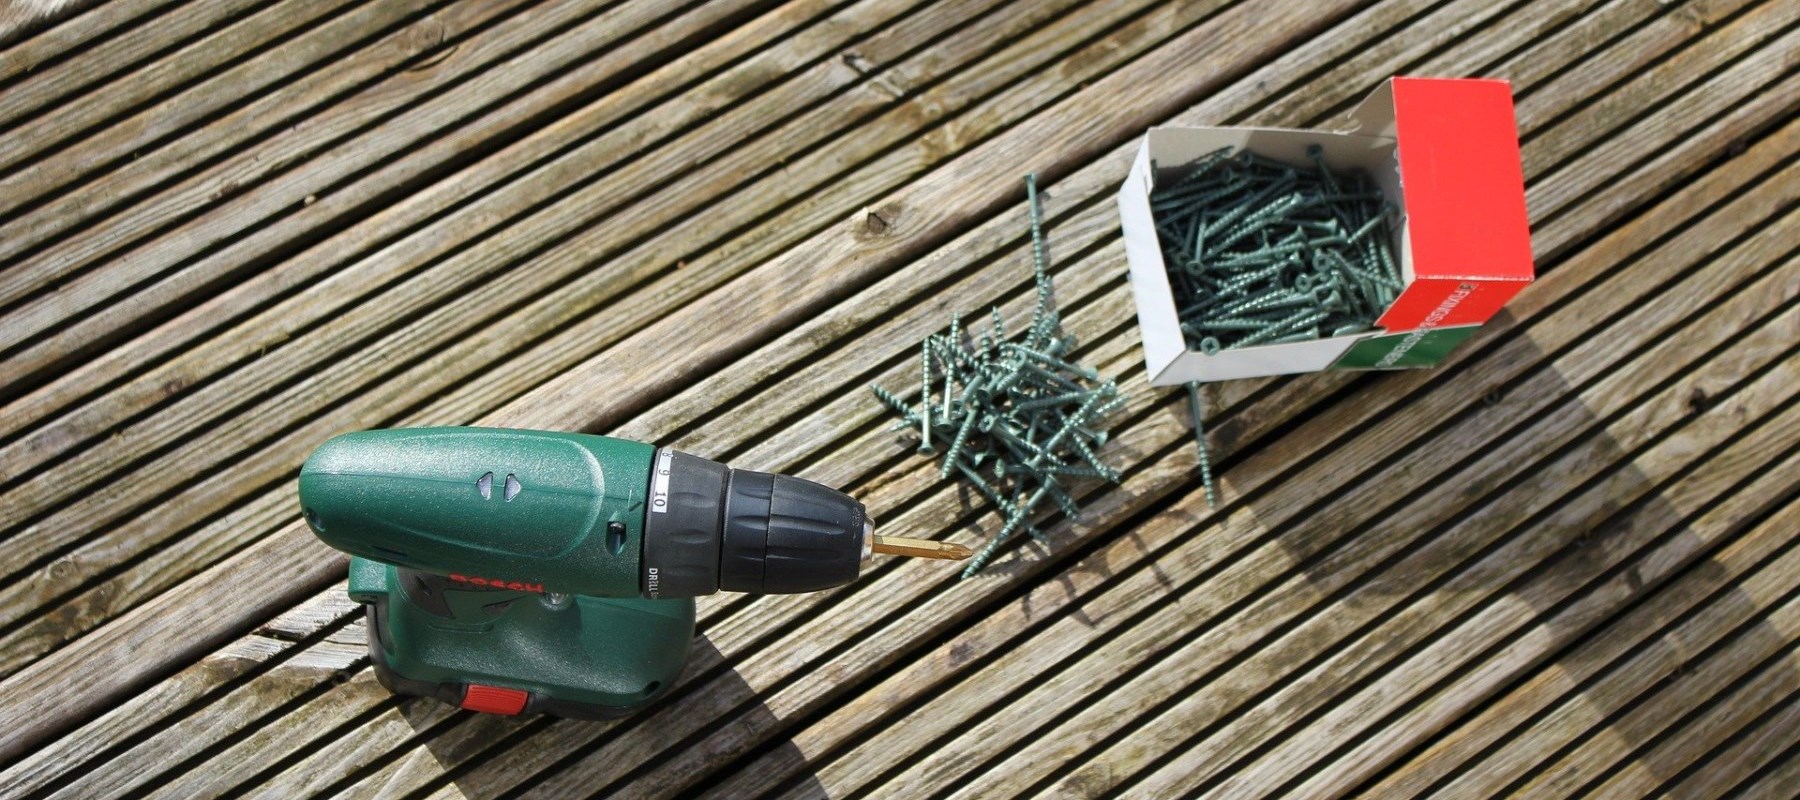 Drill and screws on wooden deck